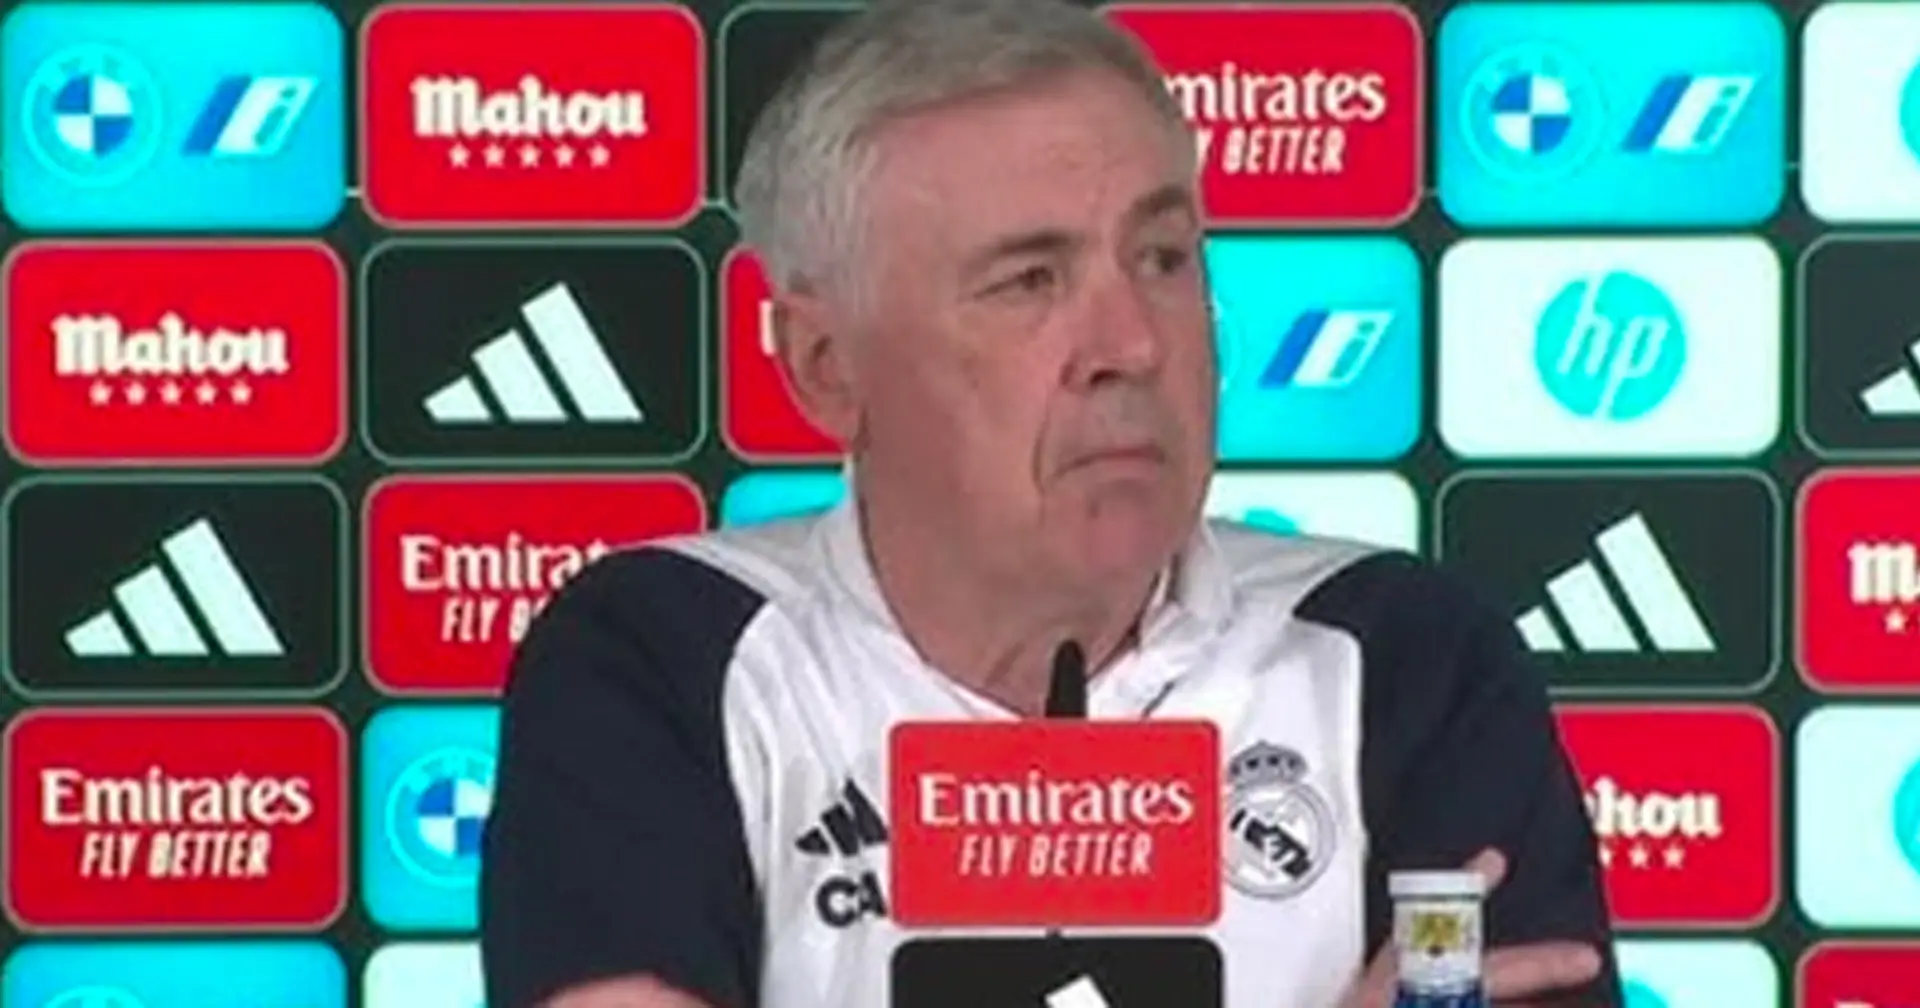 Carlo Ancelotti reveals interesting tradition his players have before games